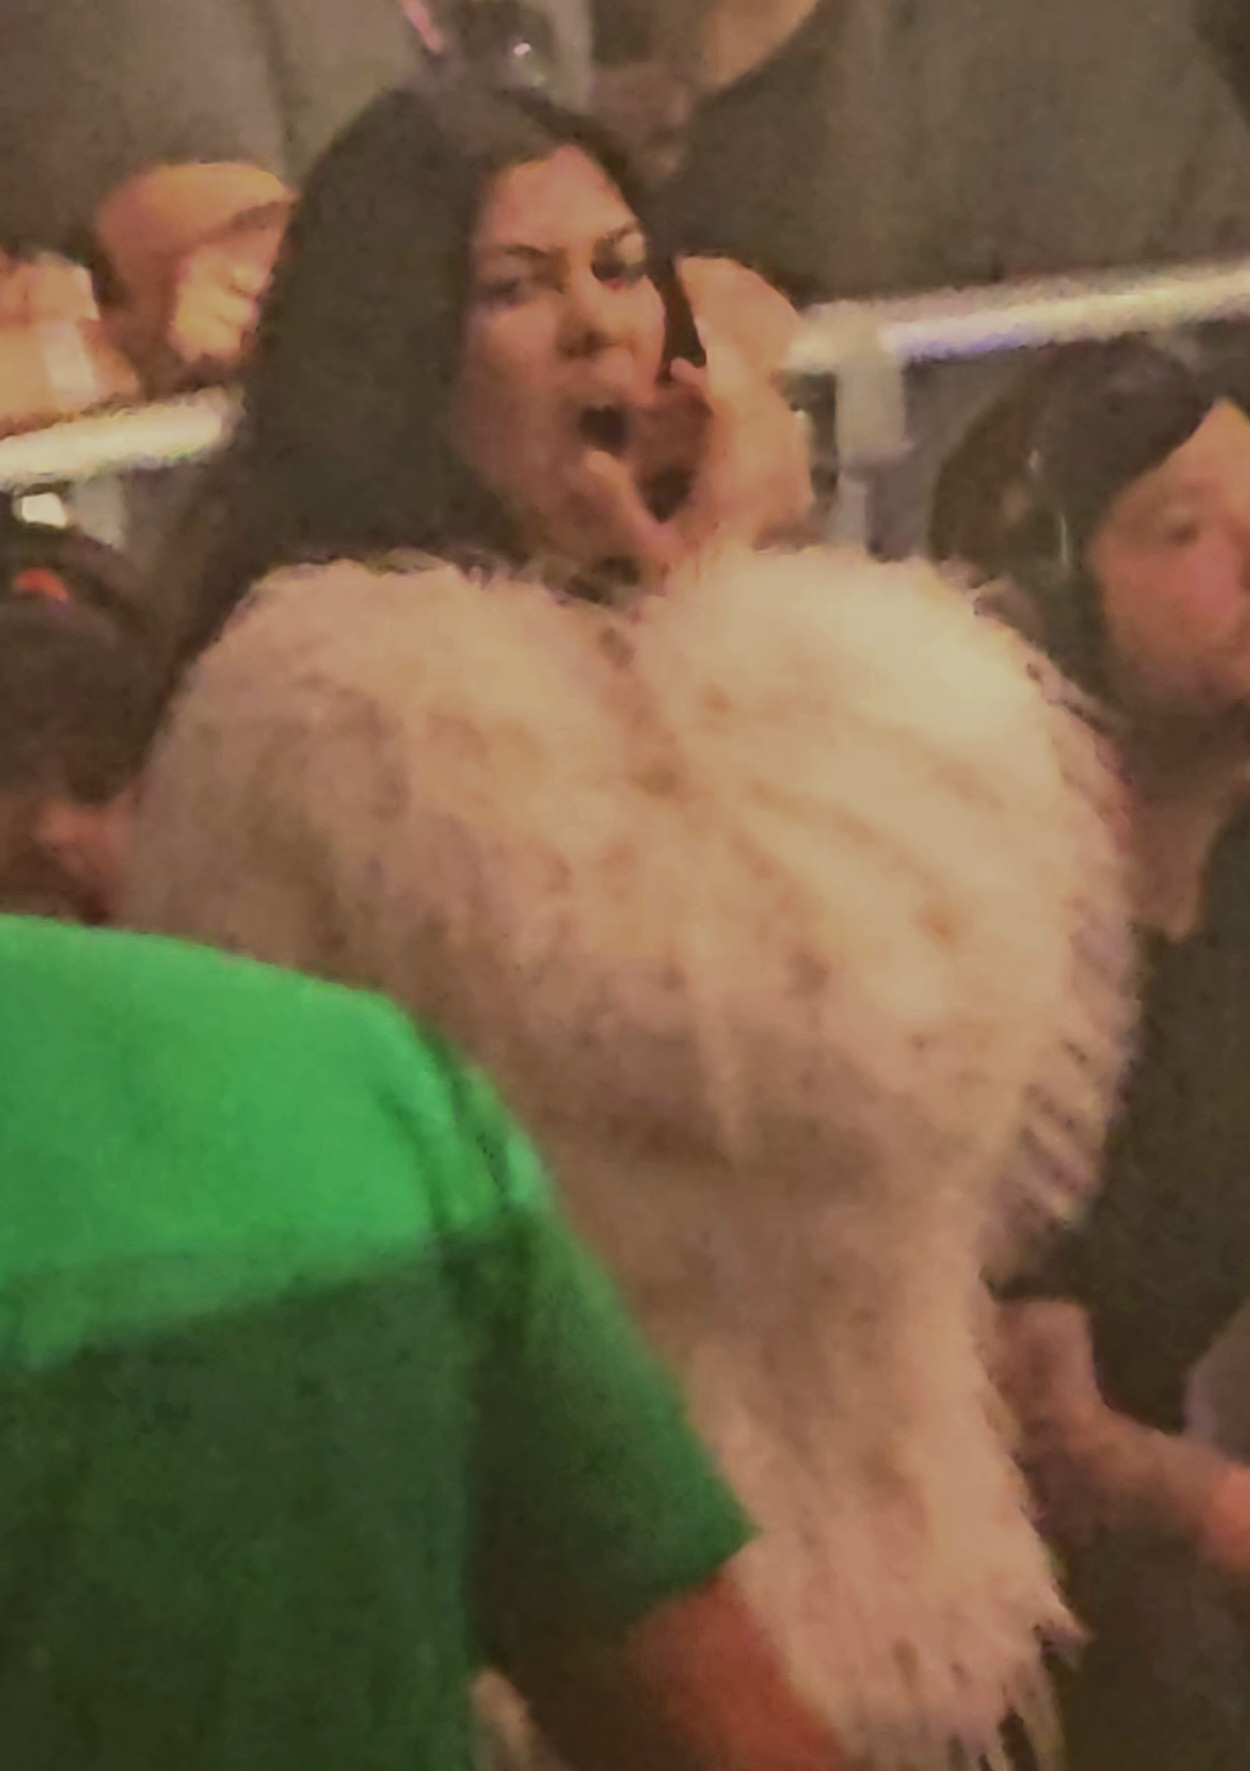 Kourtney Kardashian looking tired in the crowd of a Blink-182 concert in Las Vegas, Nevada, on Wednesday night